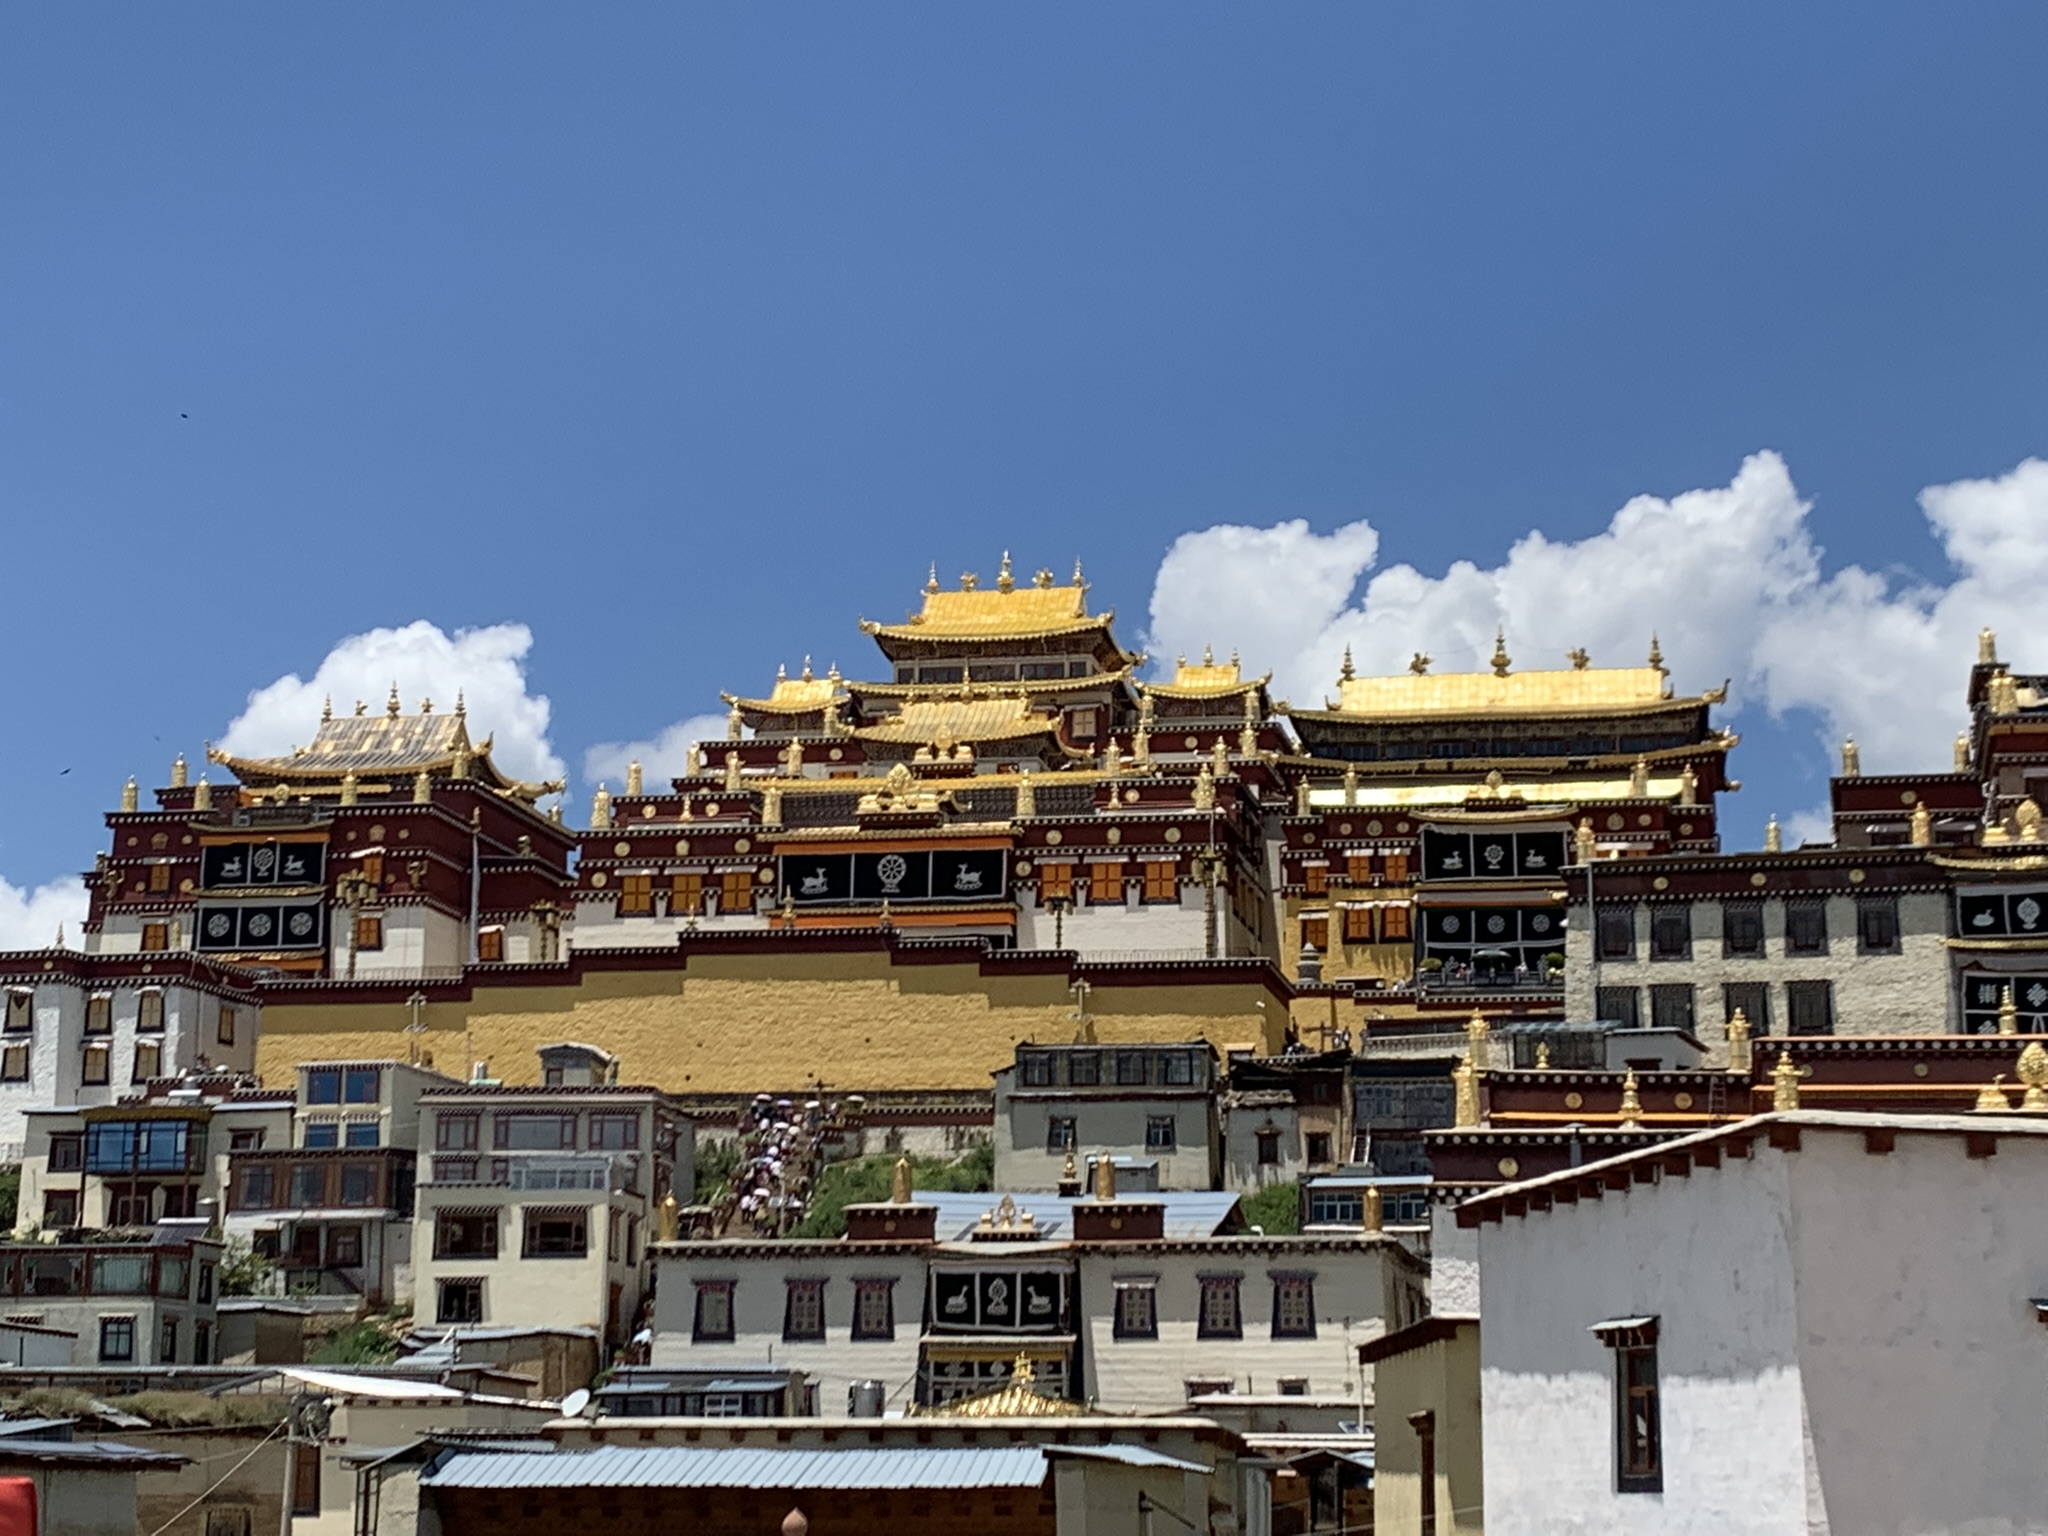 Large hilltop building complex with golden rooftops